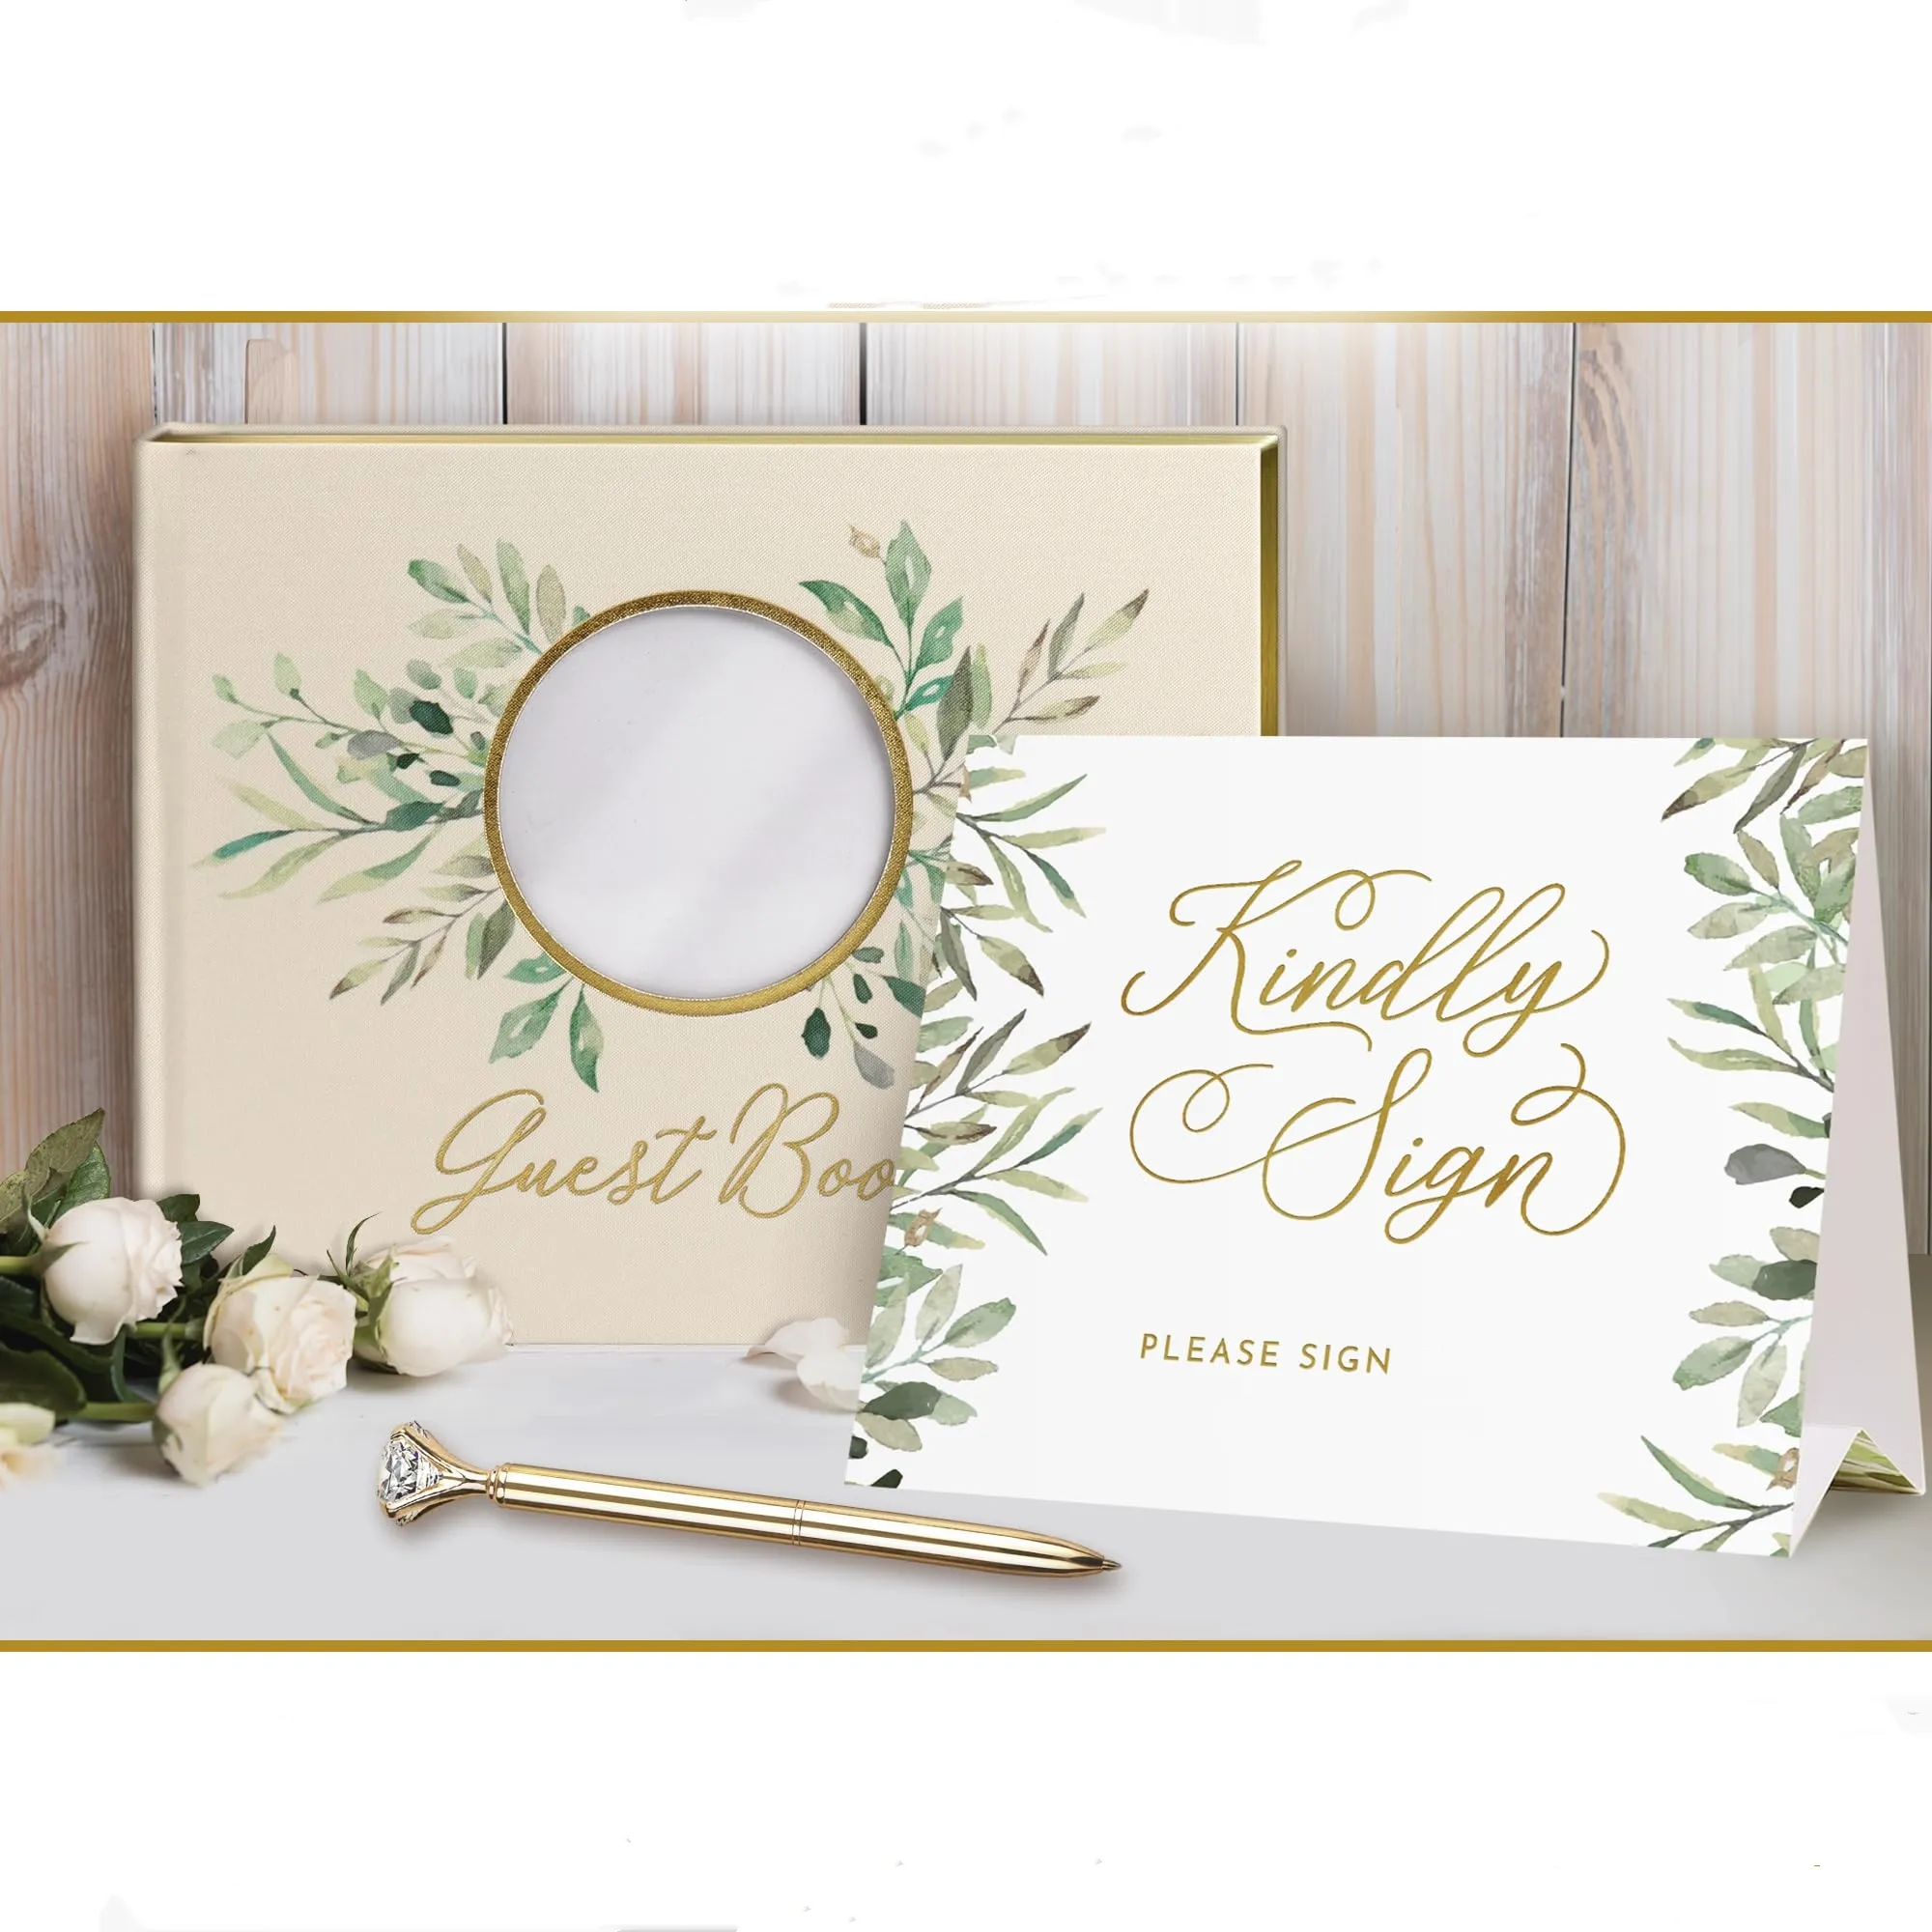 Customize Cover Linen Photo Guestbook to Sign at Reception Party Wedding Guest Book with Pen and Table Sign